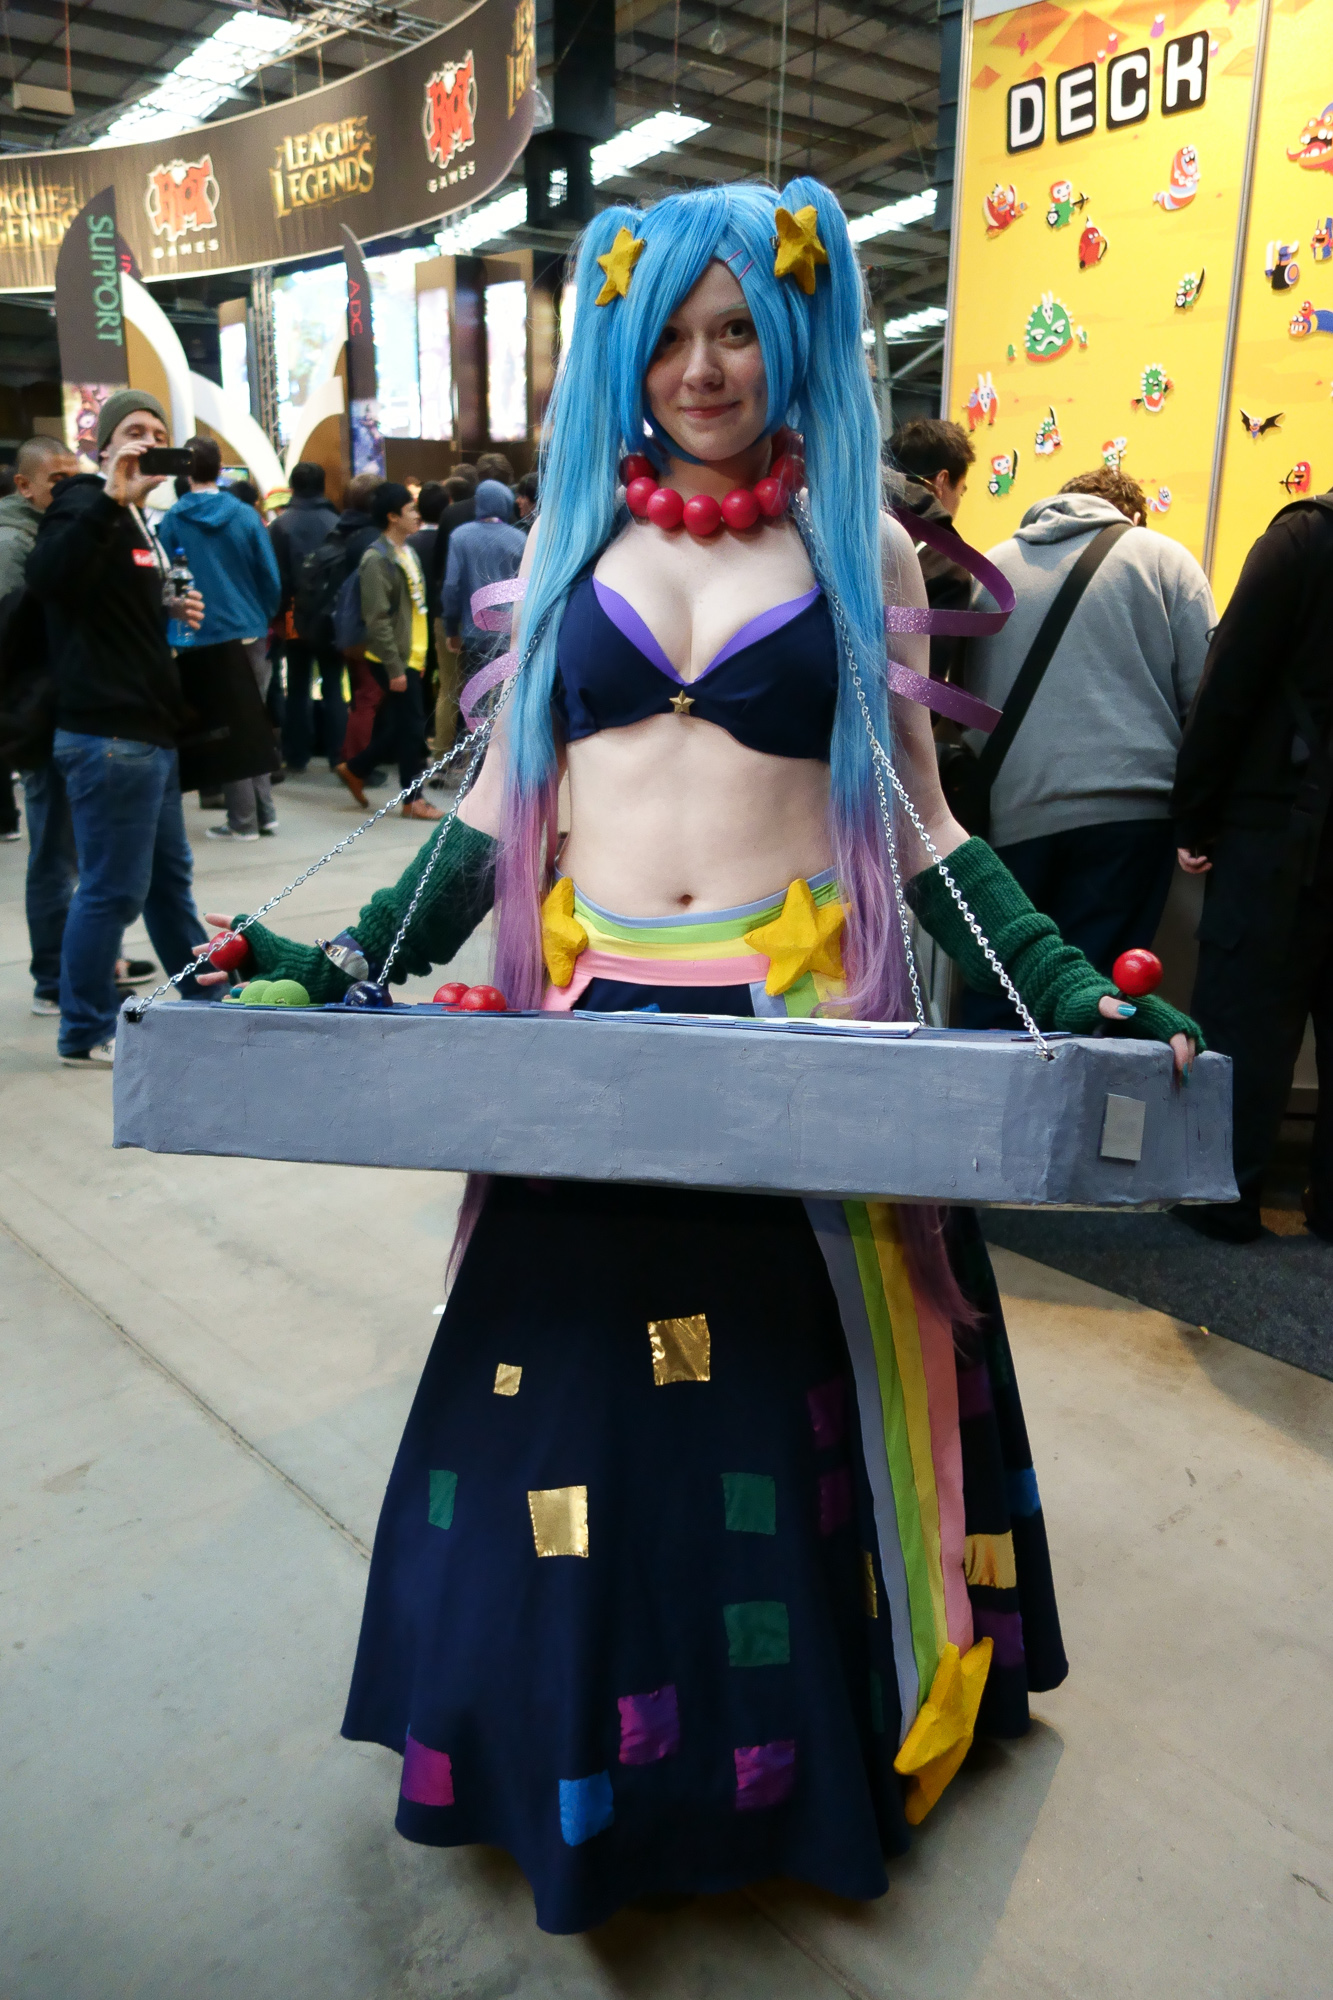 I had no idea who she was cosplaying until I picked up the promo card Riot was handing out, where I learnt she was cosplaying Arcade Sona from League of Legends